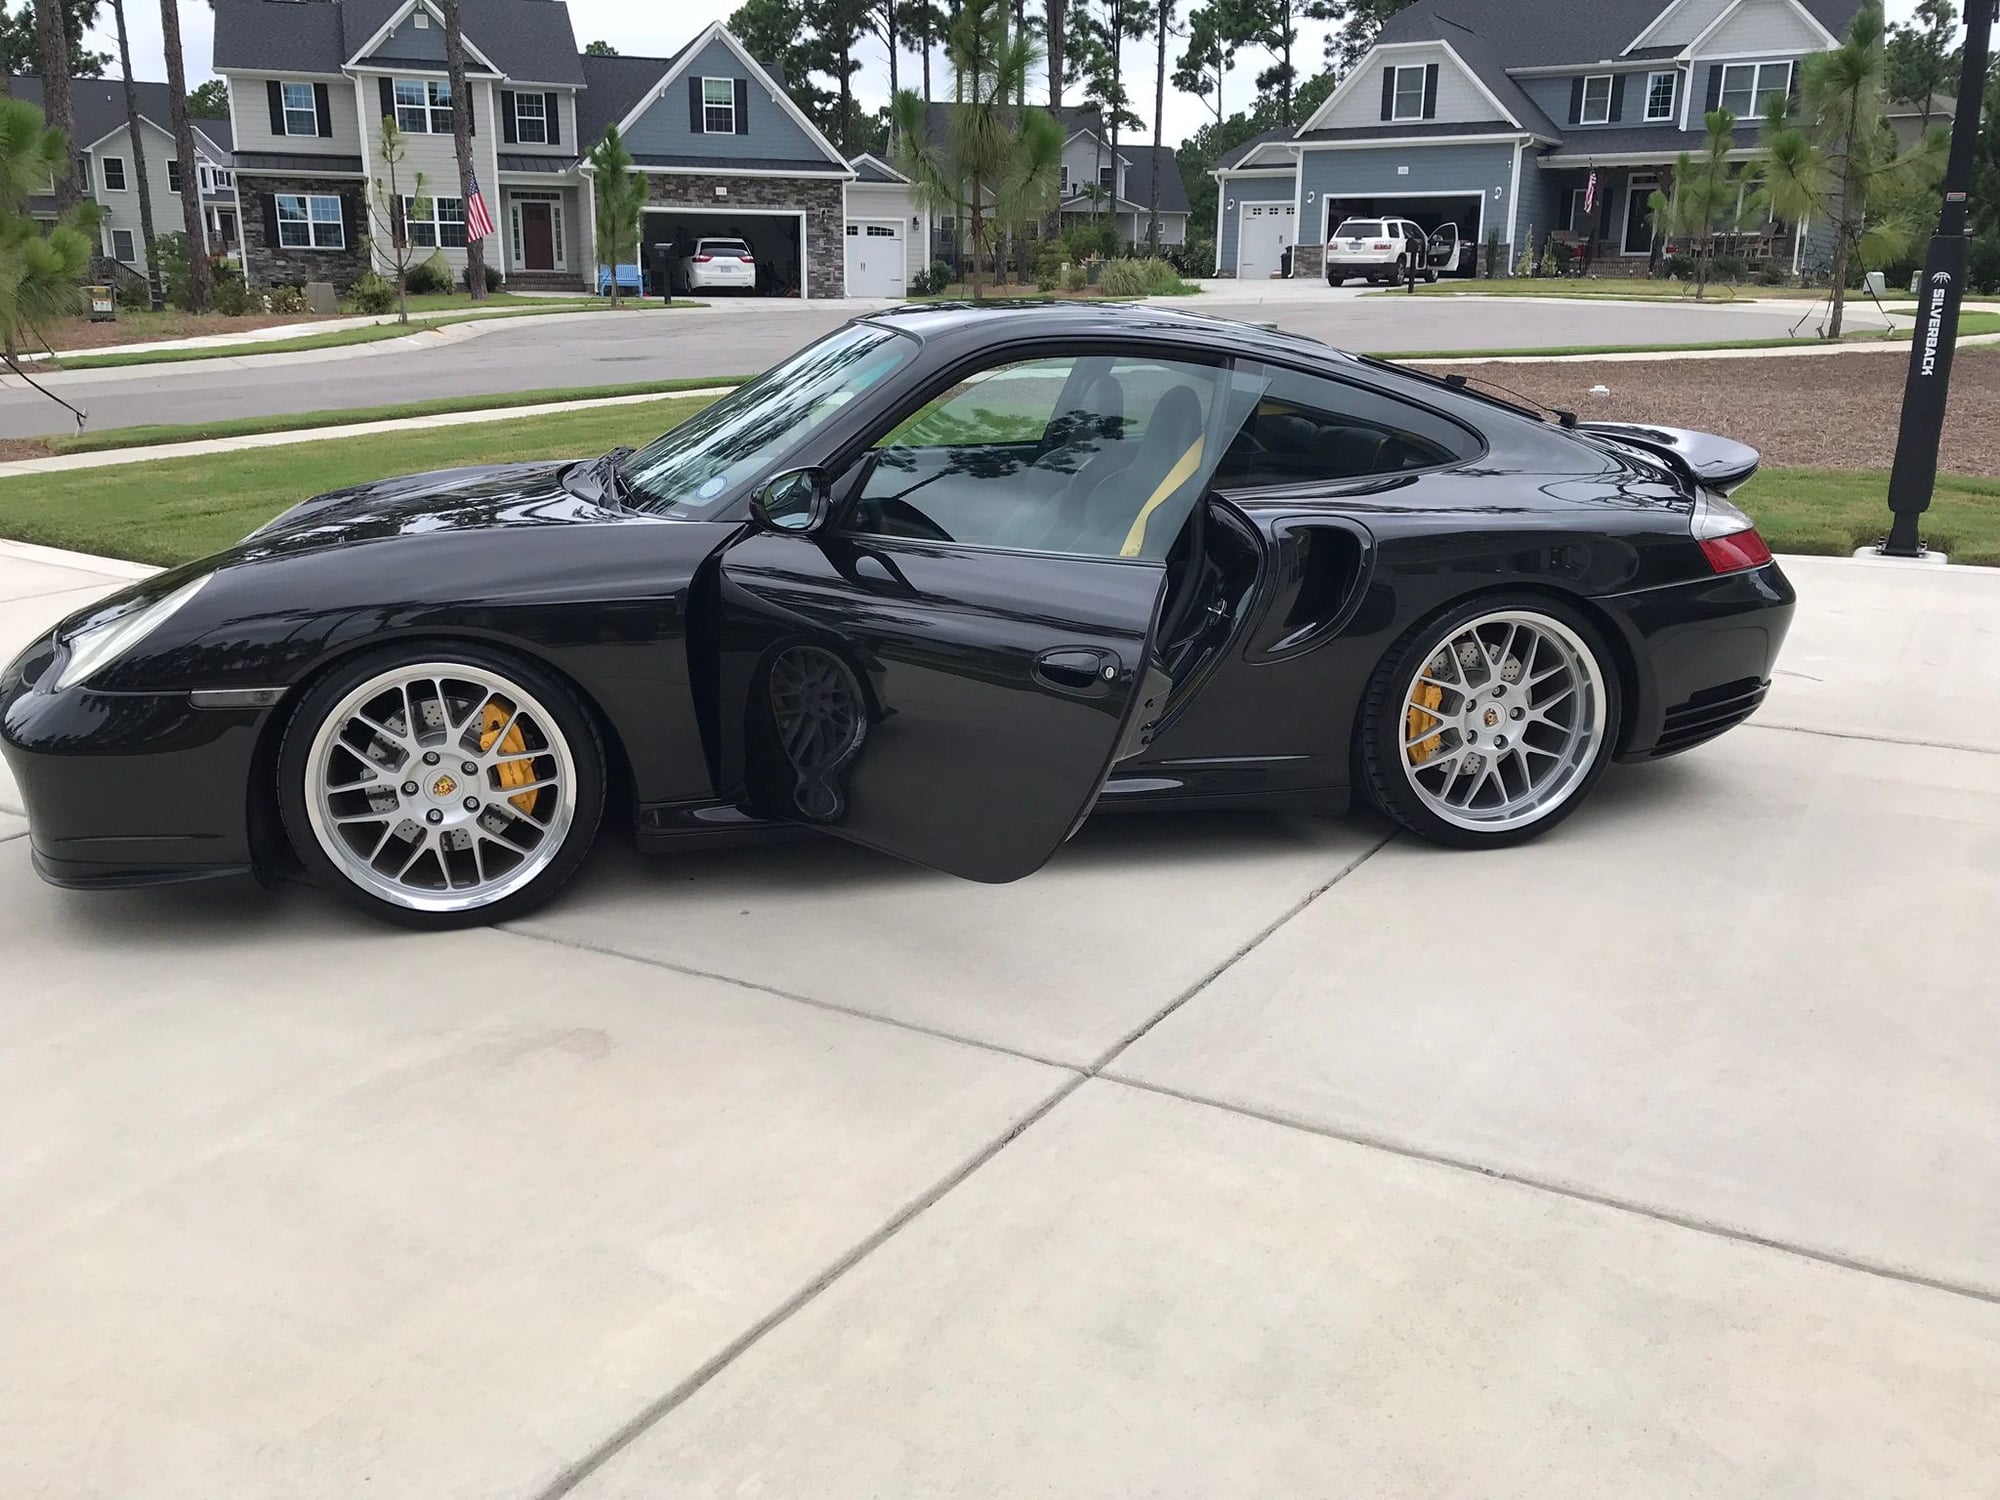 2001 Porsche 911 - 2001 911 Turbo with yellow calipers and belts - Used - VIN WP0AB299X1S686162 - 69,240 Miles - 6 cyl - AWD - Manual - Coupe - Black - Southern Pines, NC 28387, United States